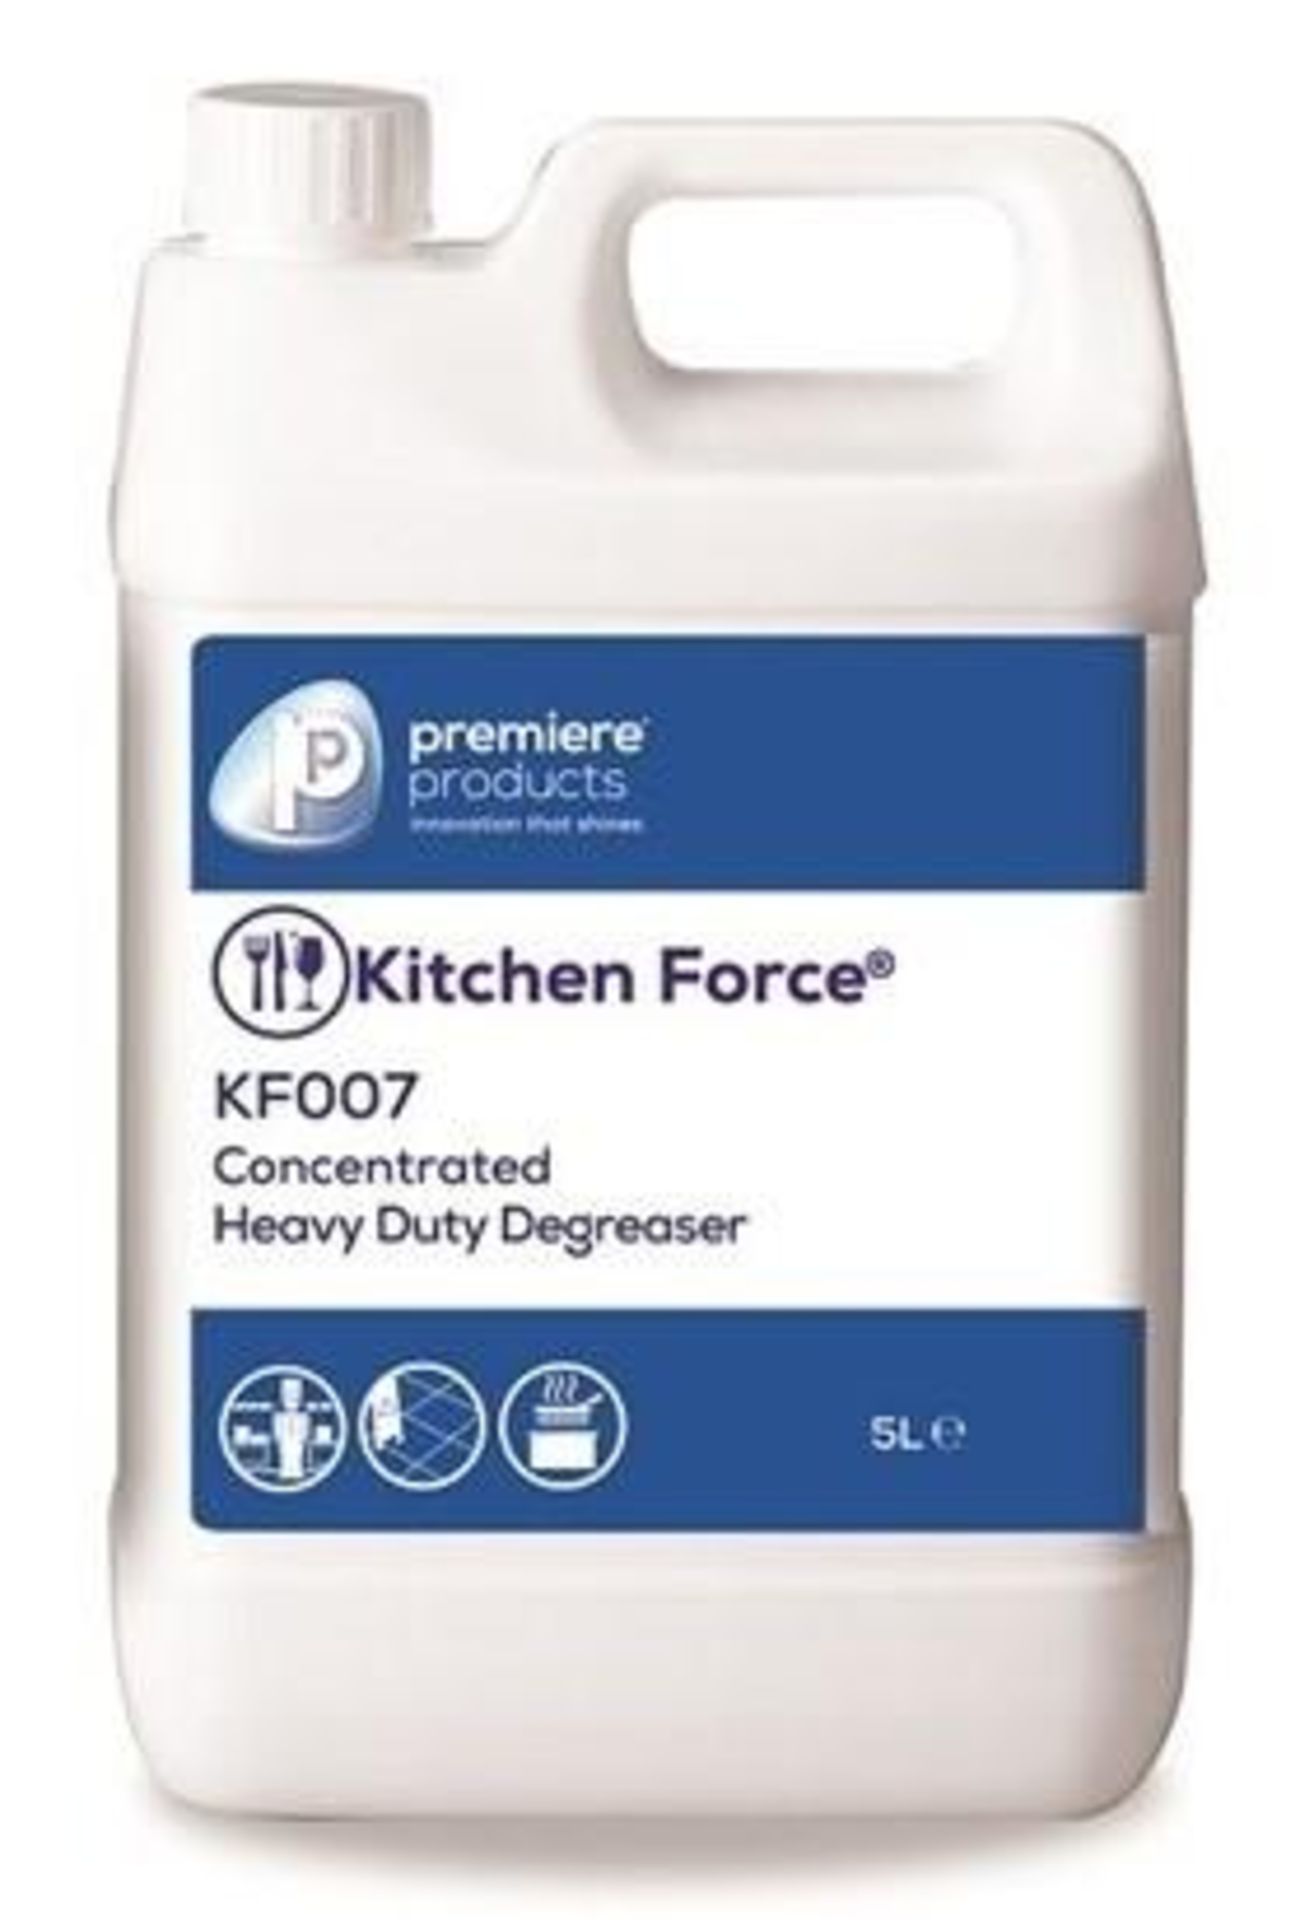 2 x Kitchen Force 5 Litre Concentrated Heavy Duty Degreaser - Premiere Products - Includes 2 x 5